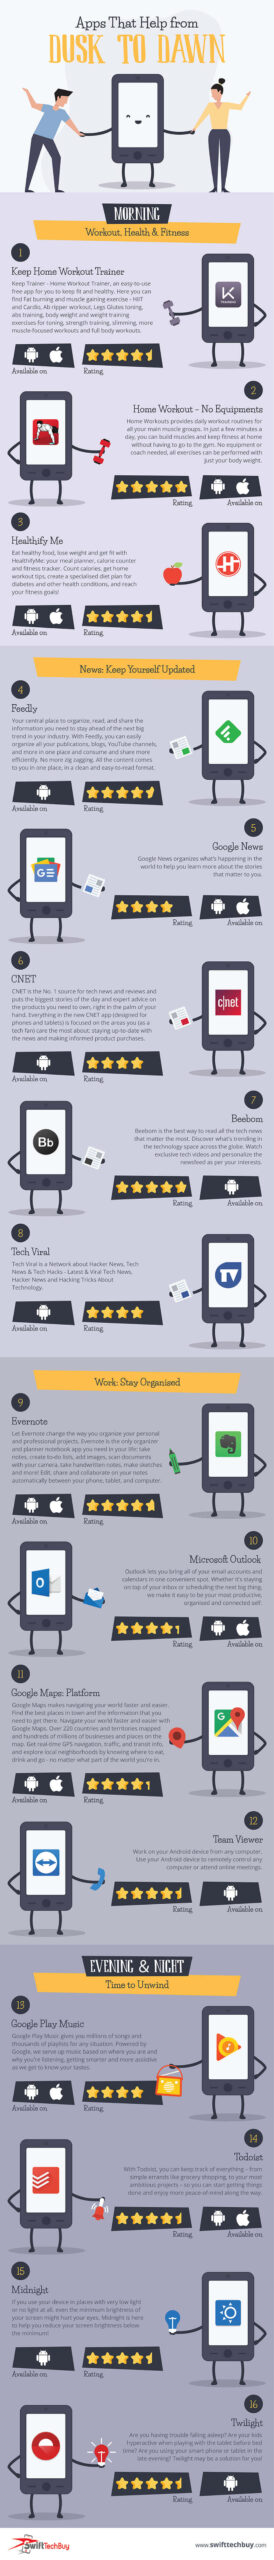 Apps that Help from Dusk to Dawn - Infographic